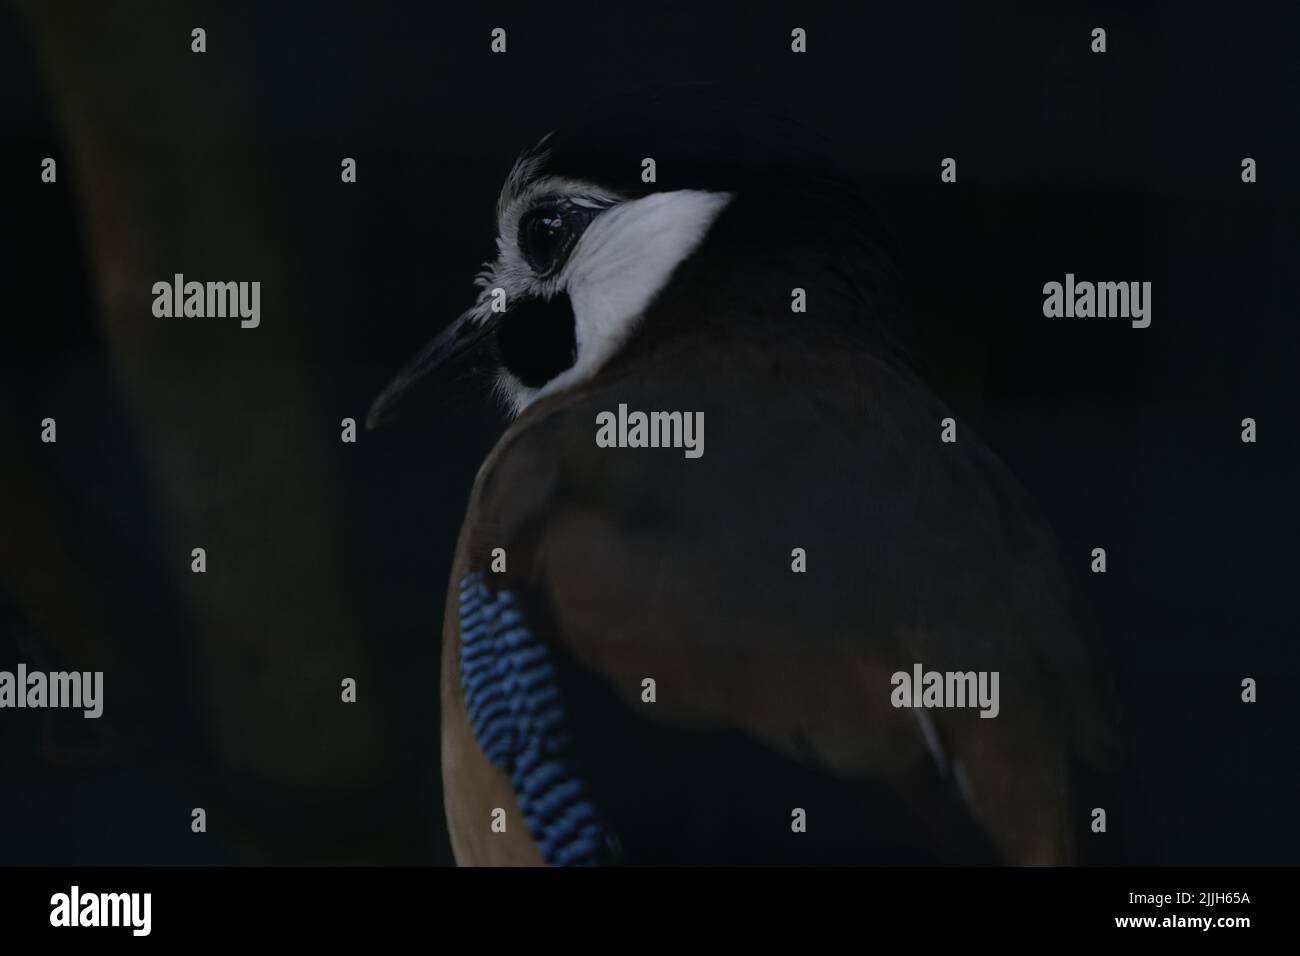 A back view of adorable Blue jay looking to the left in the dark forest Stock Photo